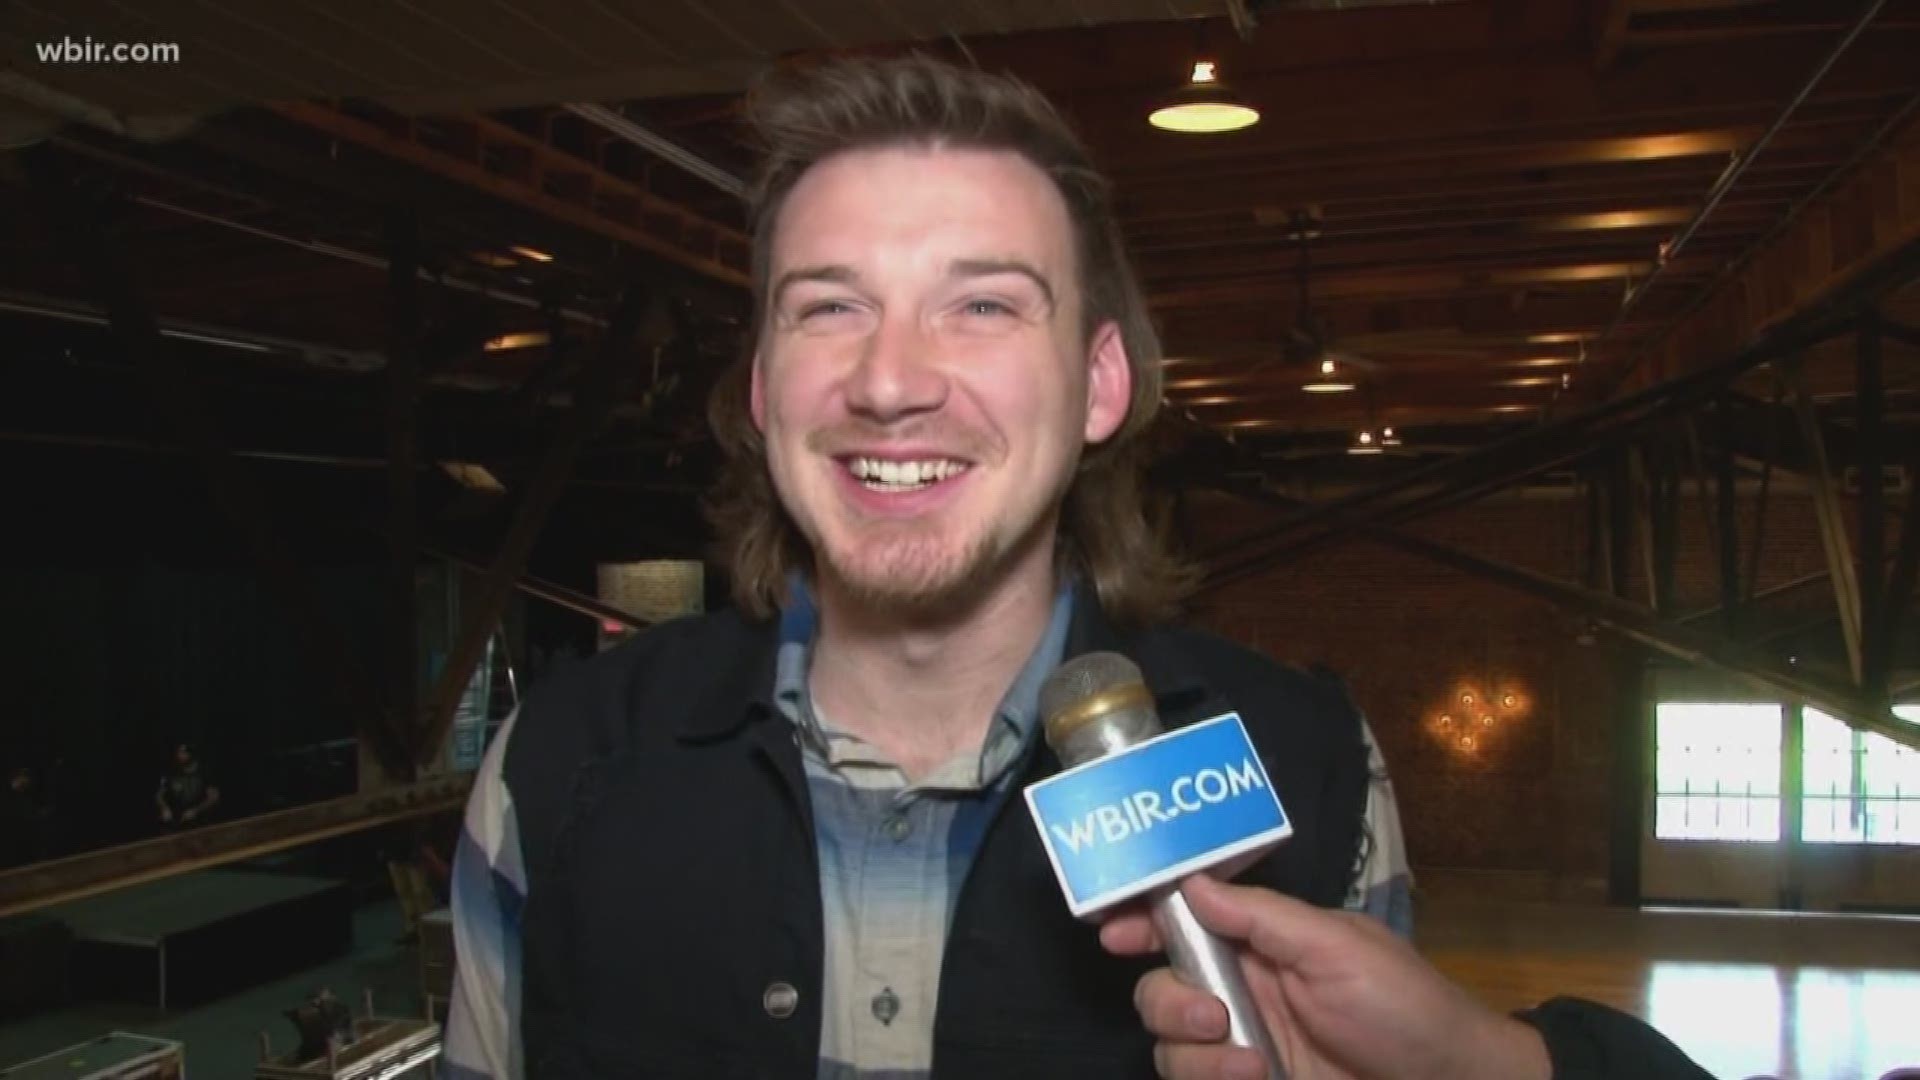 Musician Morgan Wallen has a sold-out show at Mill & Mine in Knoxville. The Gibbs High School graduate is back in his hometown to celebrate his continuing success in country music. Learn more at morganwallen.com. Jan 11, 2019-4pm